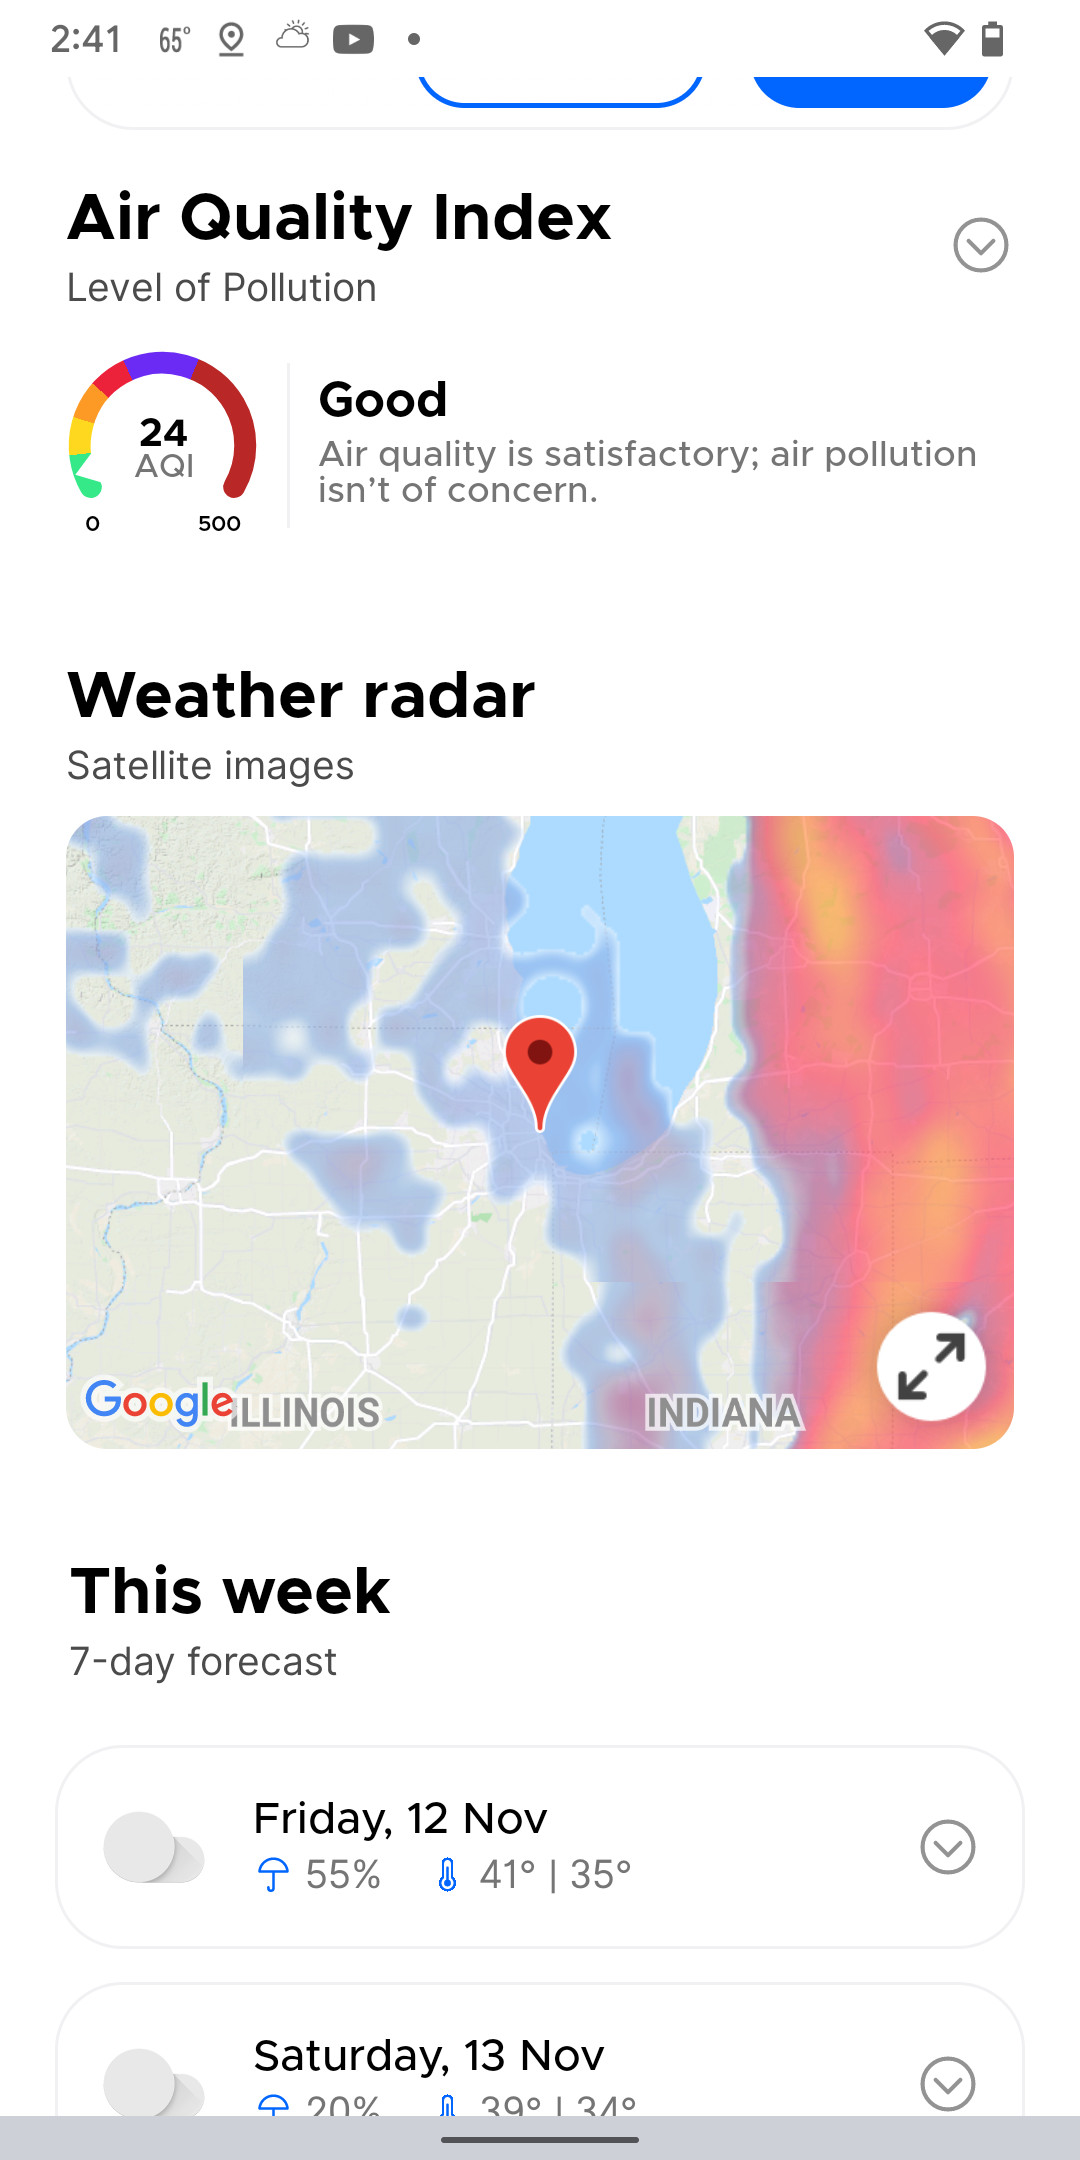 Scroll down for more weather data.